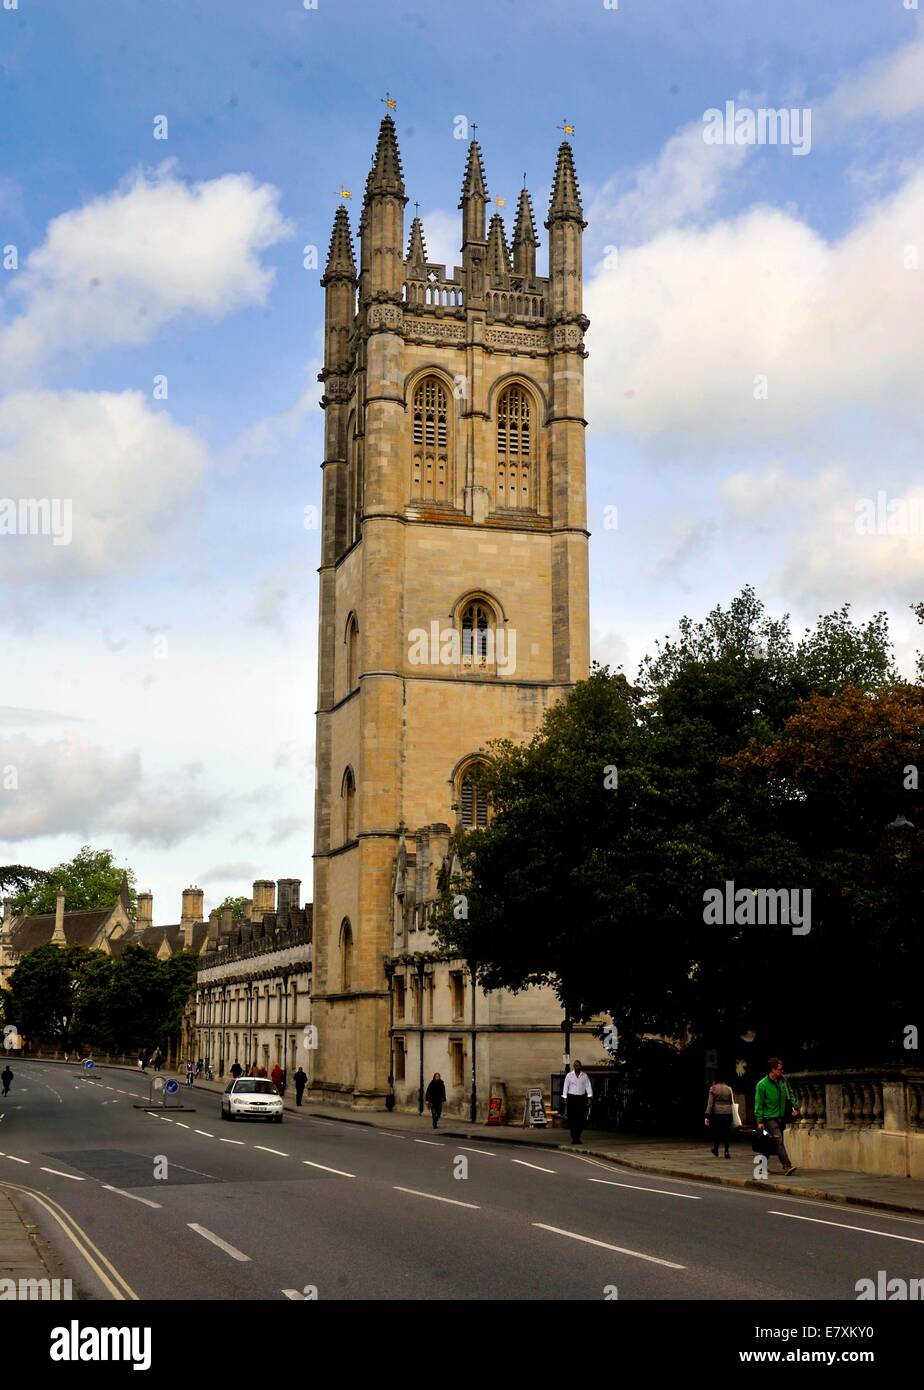 Magdalen Tower oxford   Picture By: Brian Jordan / Retna Pictures     - Stock Photo